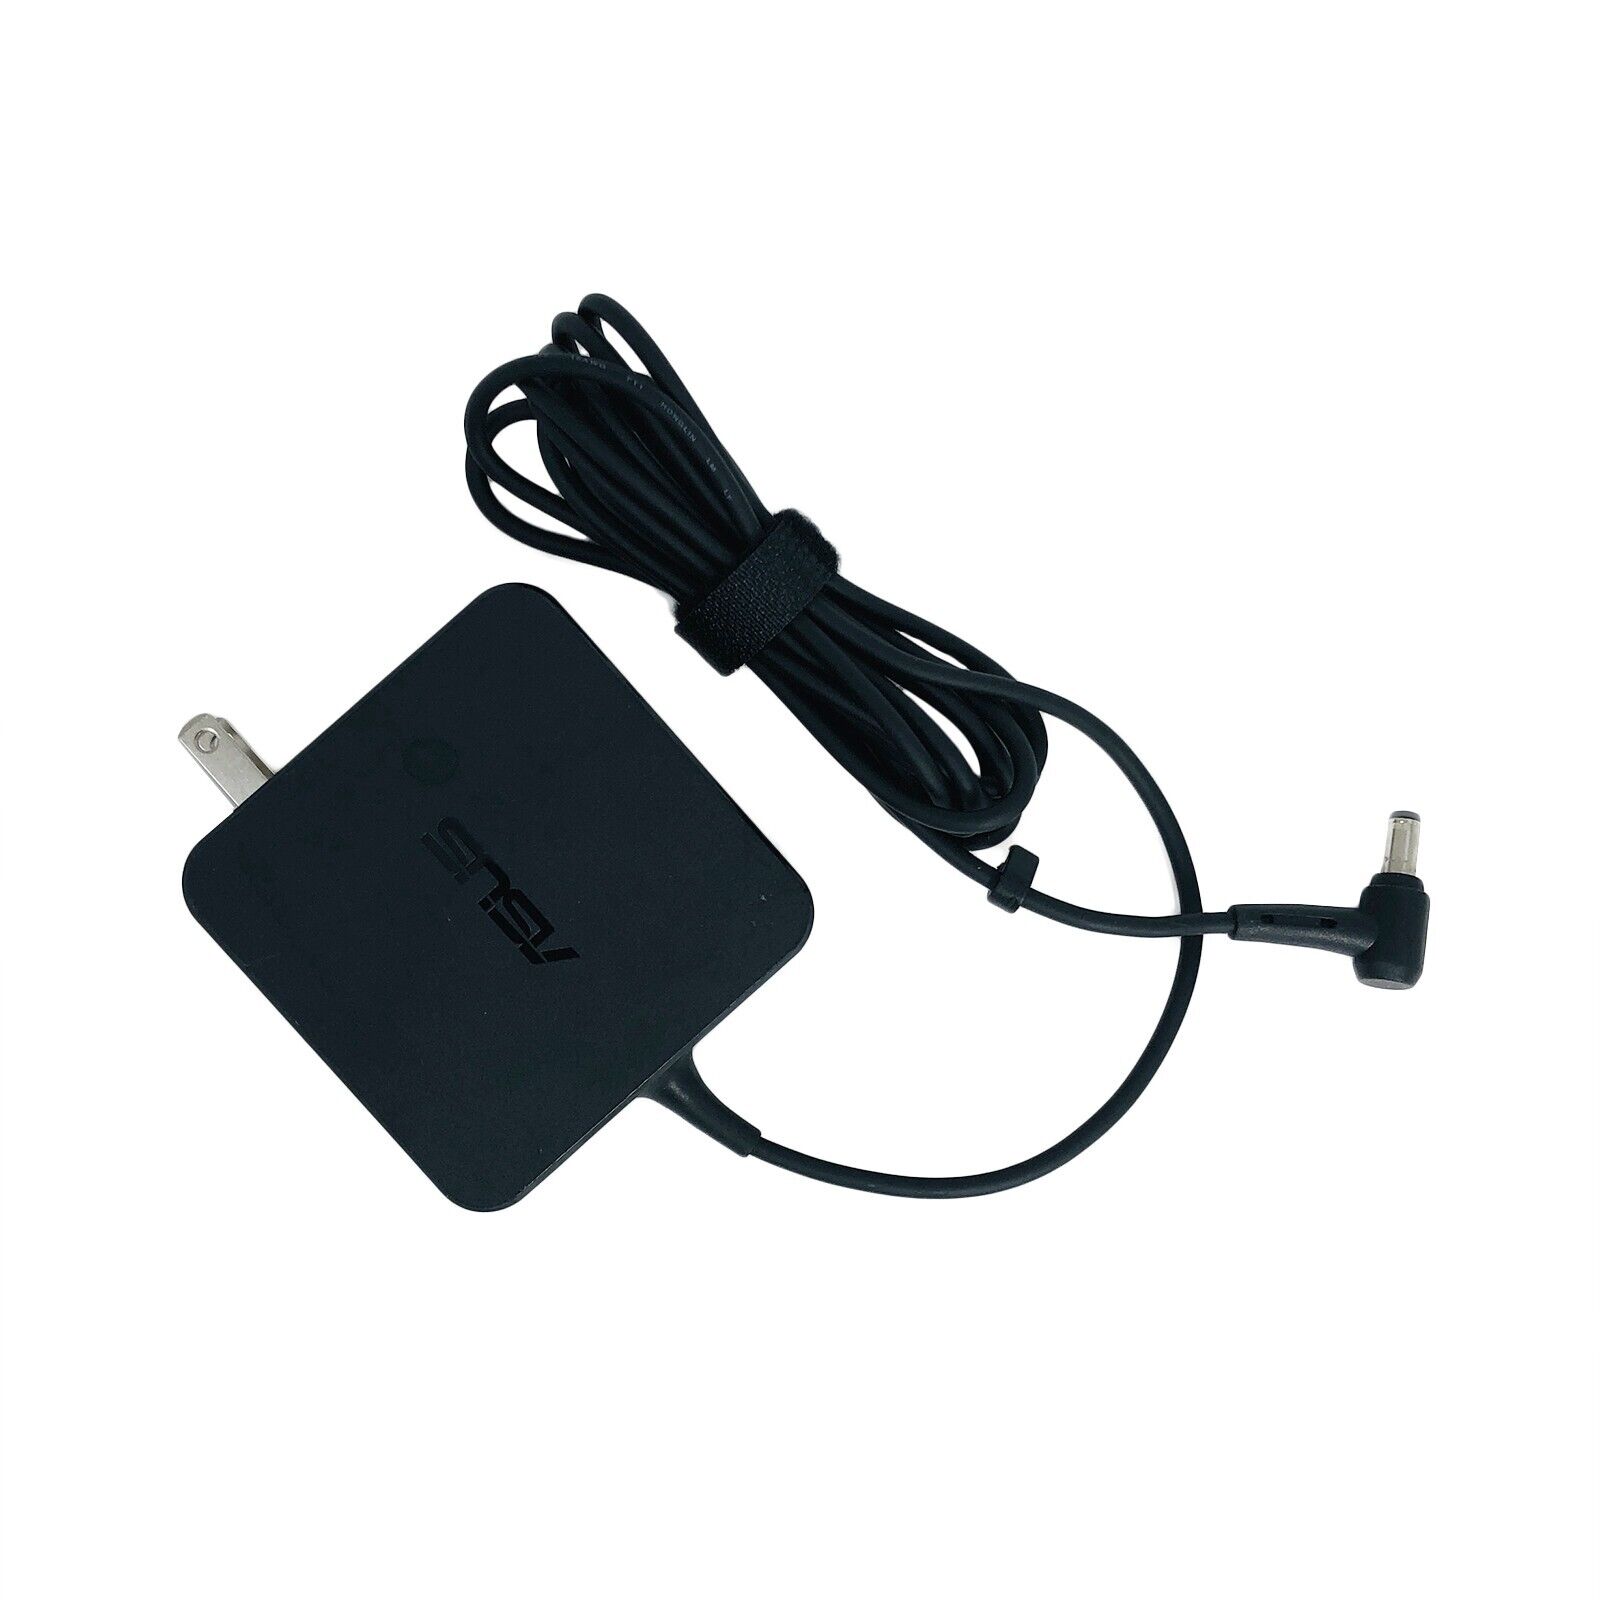 Geniune Asus 65W AC Wall Power Adapter for Asus USB3.0_HZ-3B Docking Station